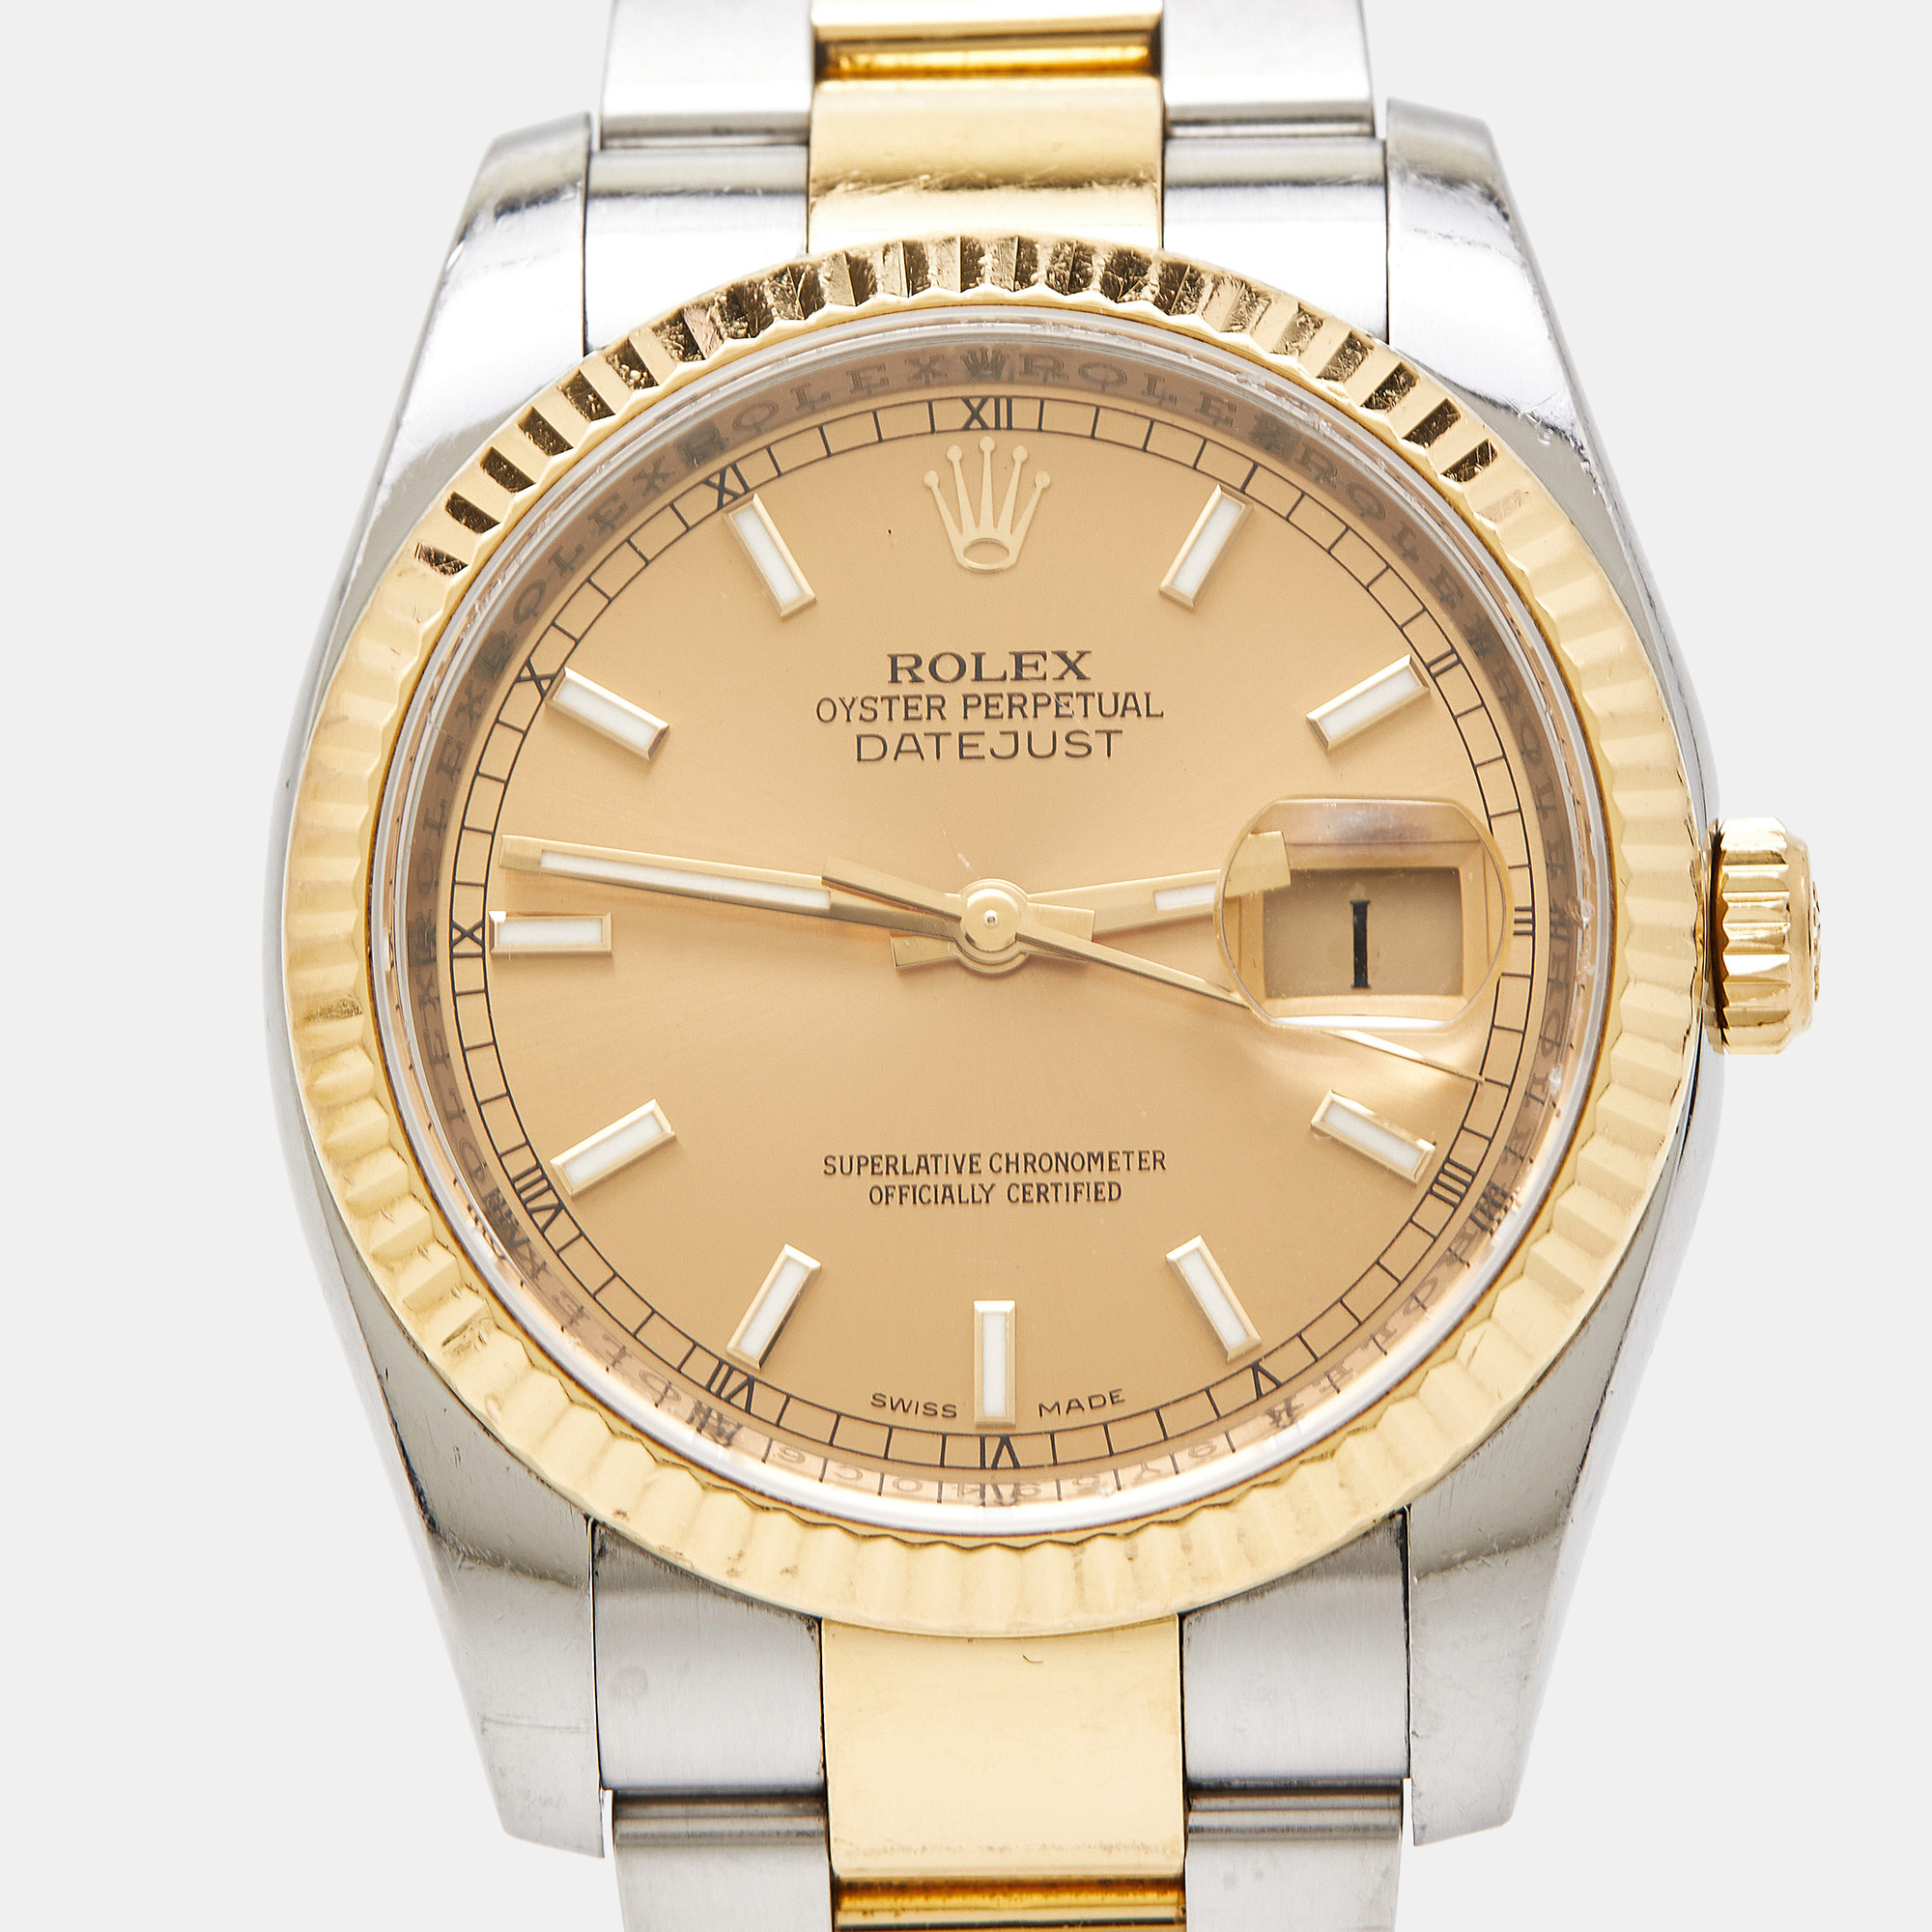 Rolex Champagne 18K Yellow Gold Stainless Steel Oyster Perpetual Datejust 116233-0172 Men's Wristwatch 36 Mm